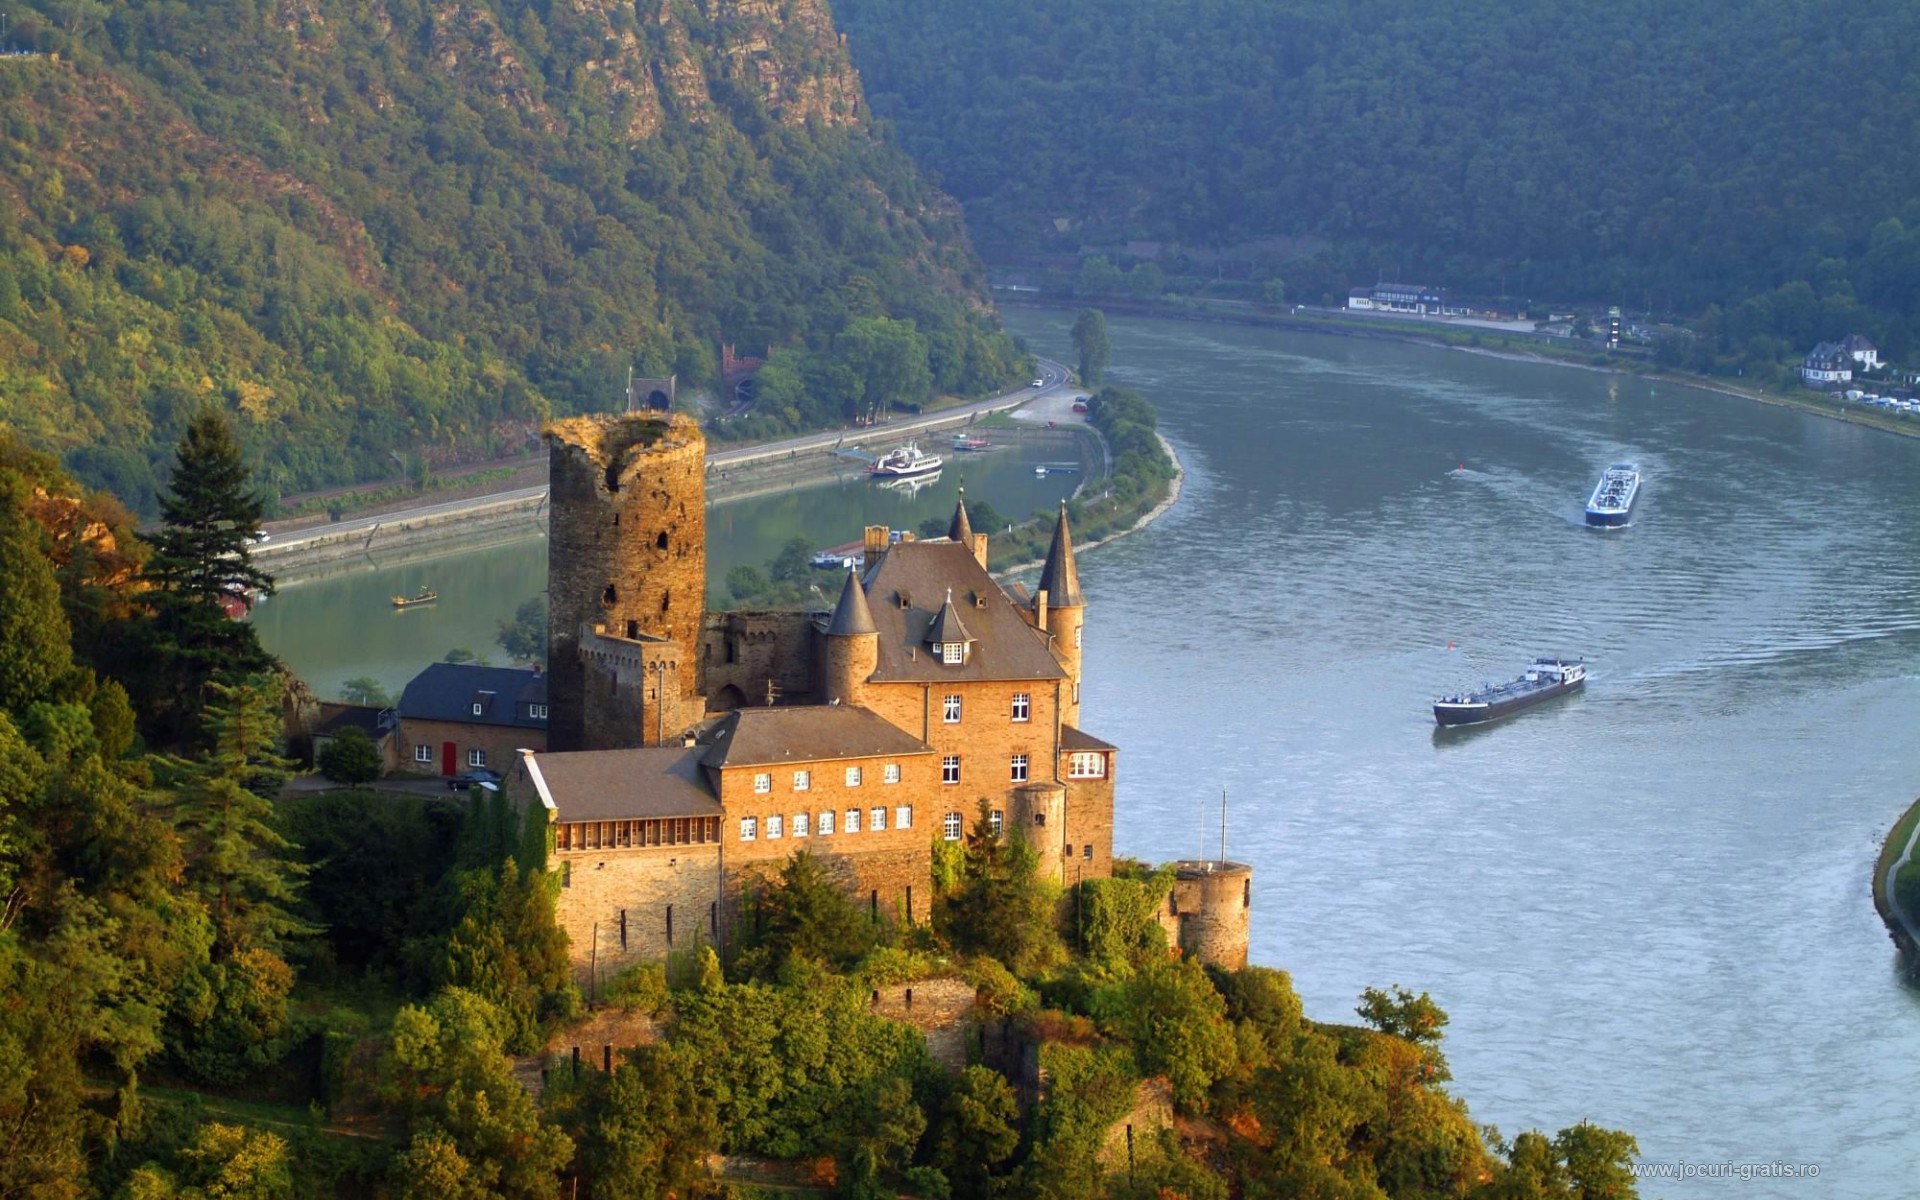 Castles & villages of the Rhine River - Travel Tales